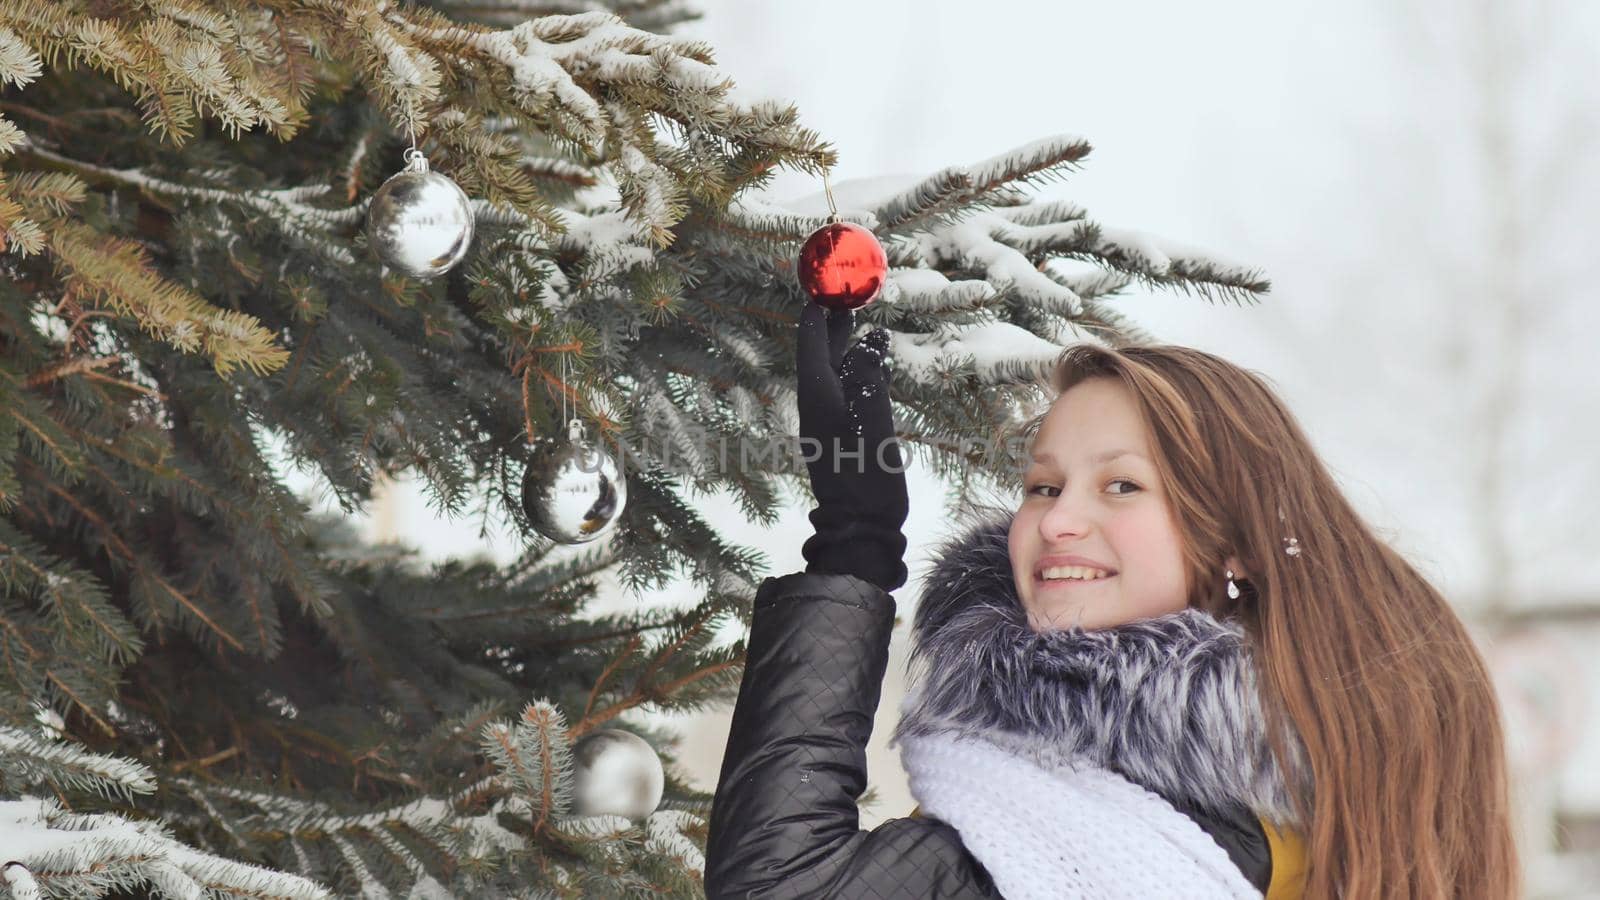 Attractive young girl with long hair in a winter suit posing against a snowy tree. A girl is stringing Christmas balls on a branch. Winter in the forest